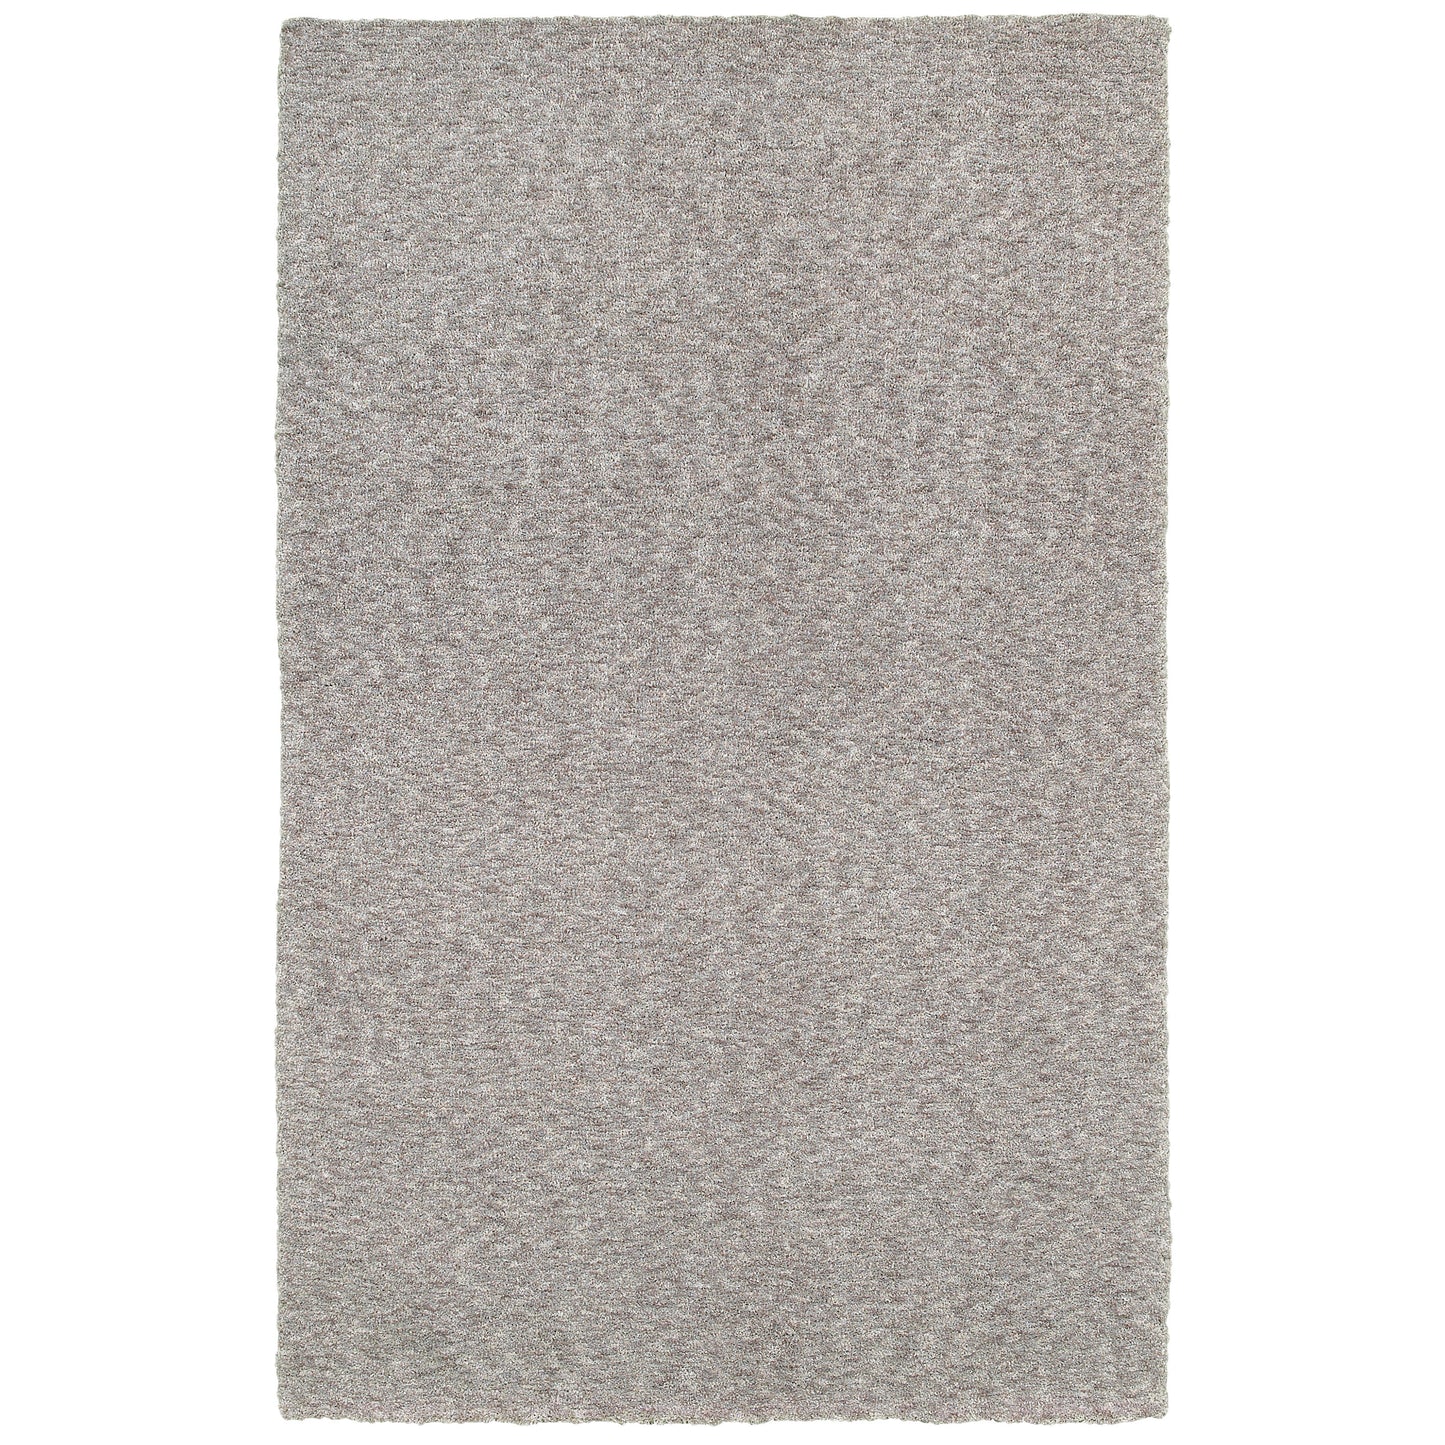 HEAVENLY Shag Hand-Tufted Synthetic Blend Indoor Area Rug by Oriental Weavers